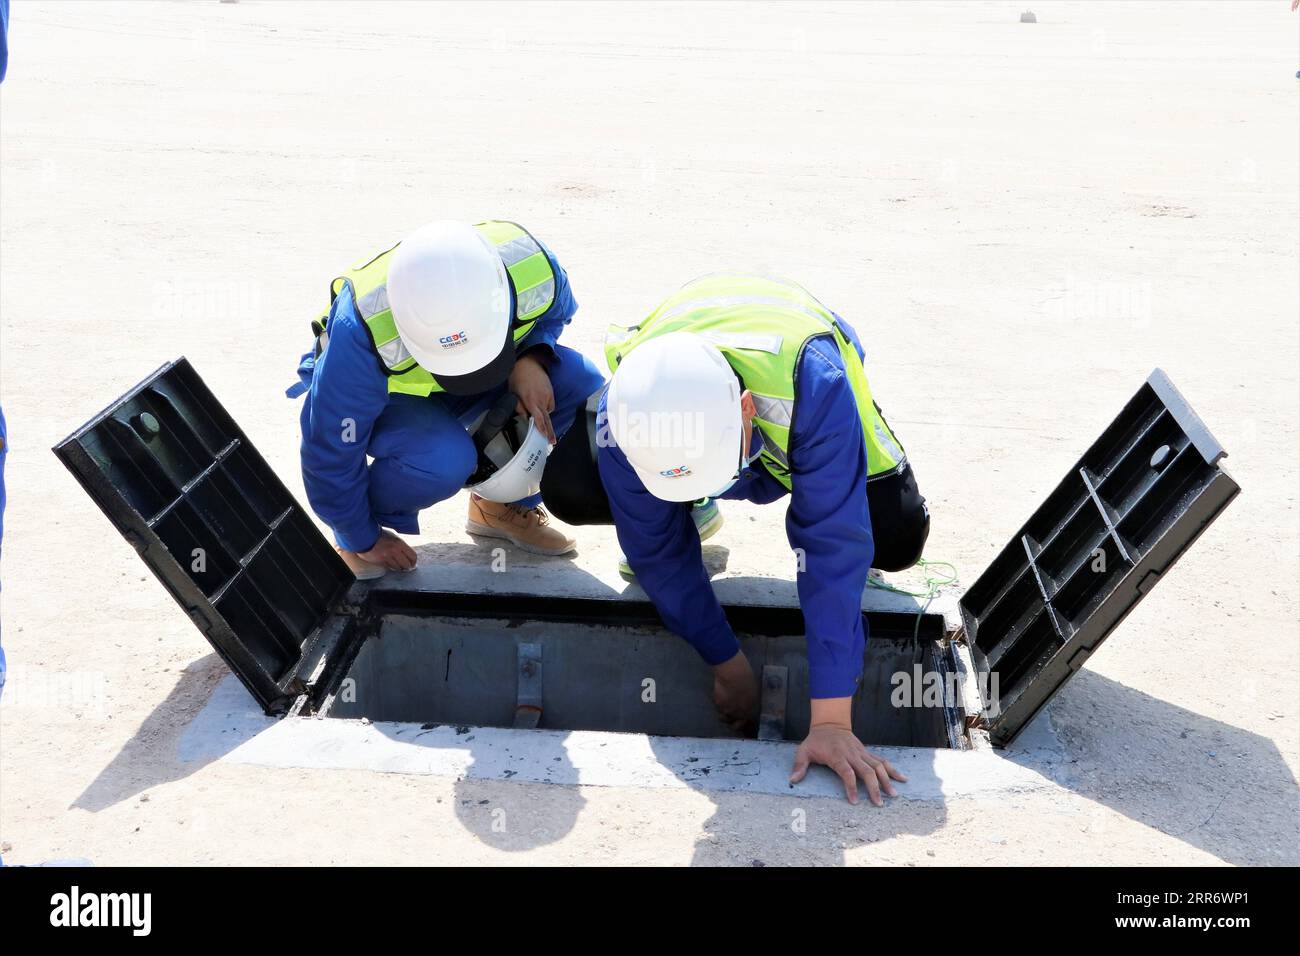 210302 -- JAHRA GOVERNORATE, March 2, 2021 -- Staff members work at the construction site of a project of China Gezhouba Group Corporation CGGC in a desert of Jahra Governorate, Kuwait, March 2, 2021. China Gezhouba Group Corporation CGGC, affiliated to China Energy Engineering Group Co., Ltd., handed over on Tuesday the second batch of its housing infrastructure project to the Kuwaiti side, marking the handover of the main works of the project. Photo by Liu Lianghaoyue/Xinhua KUWAIT-JAHRA GOVERNORATE-CHINESE COMPANY-PROJECT-HANDOVER NiexYunpeng PUBLICATIONxNOTxINxCHN Stock Photo